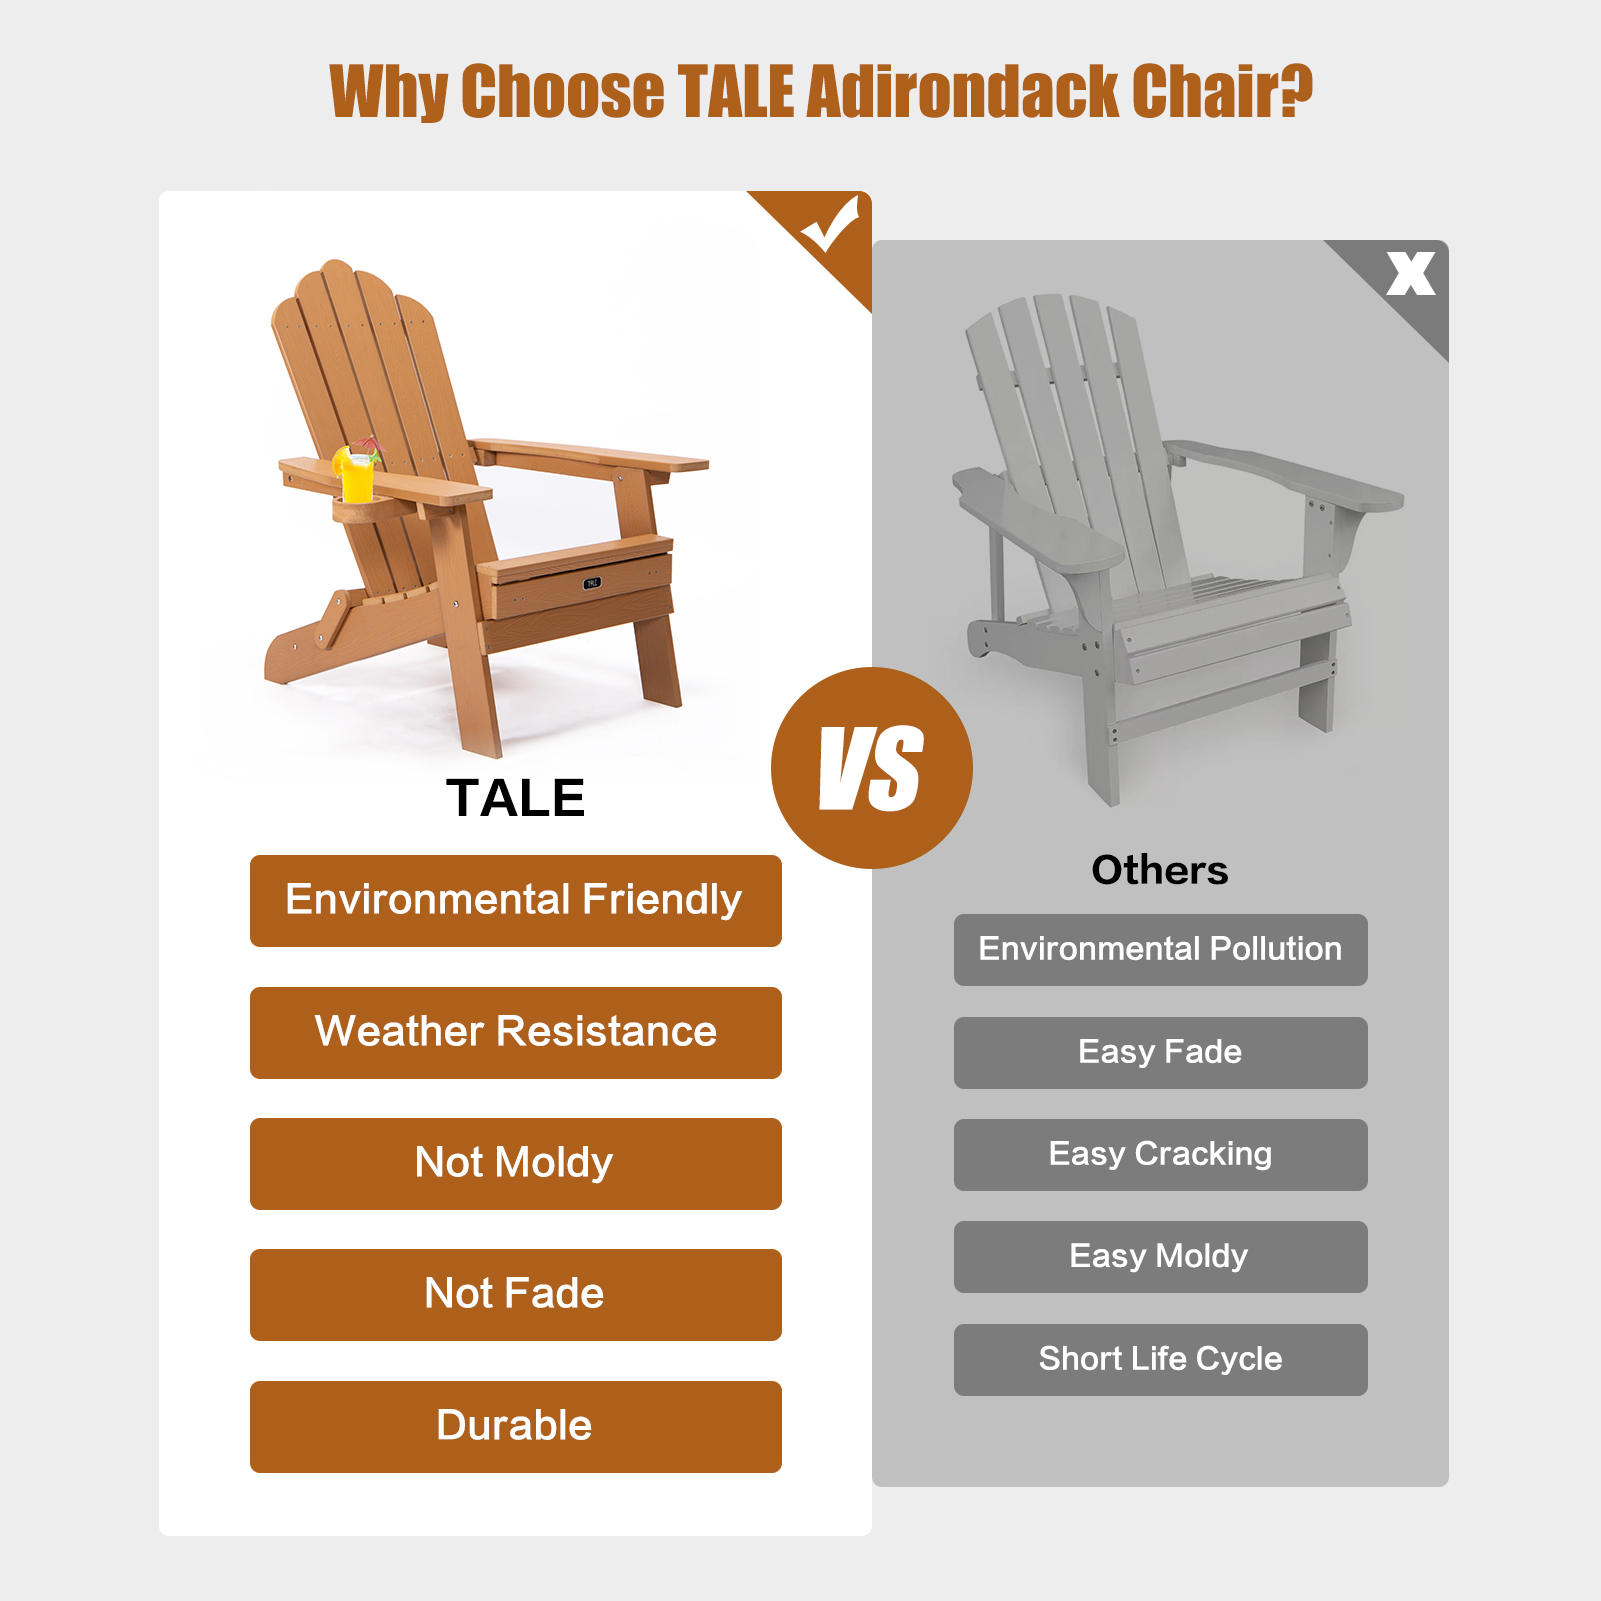 Wood Outdoor Adirondack Chair, Adirondack Chairs Folding Outdoor Patio Chairs, Wooden Accent Lounge Furniture for Yard, Patio - image 4 of 9